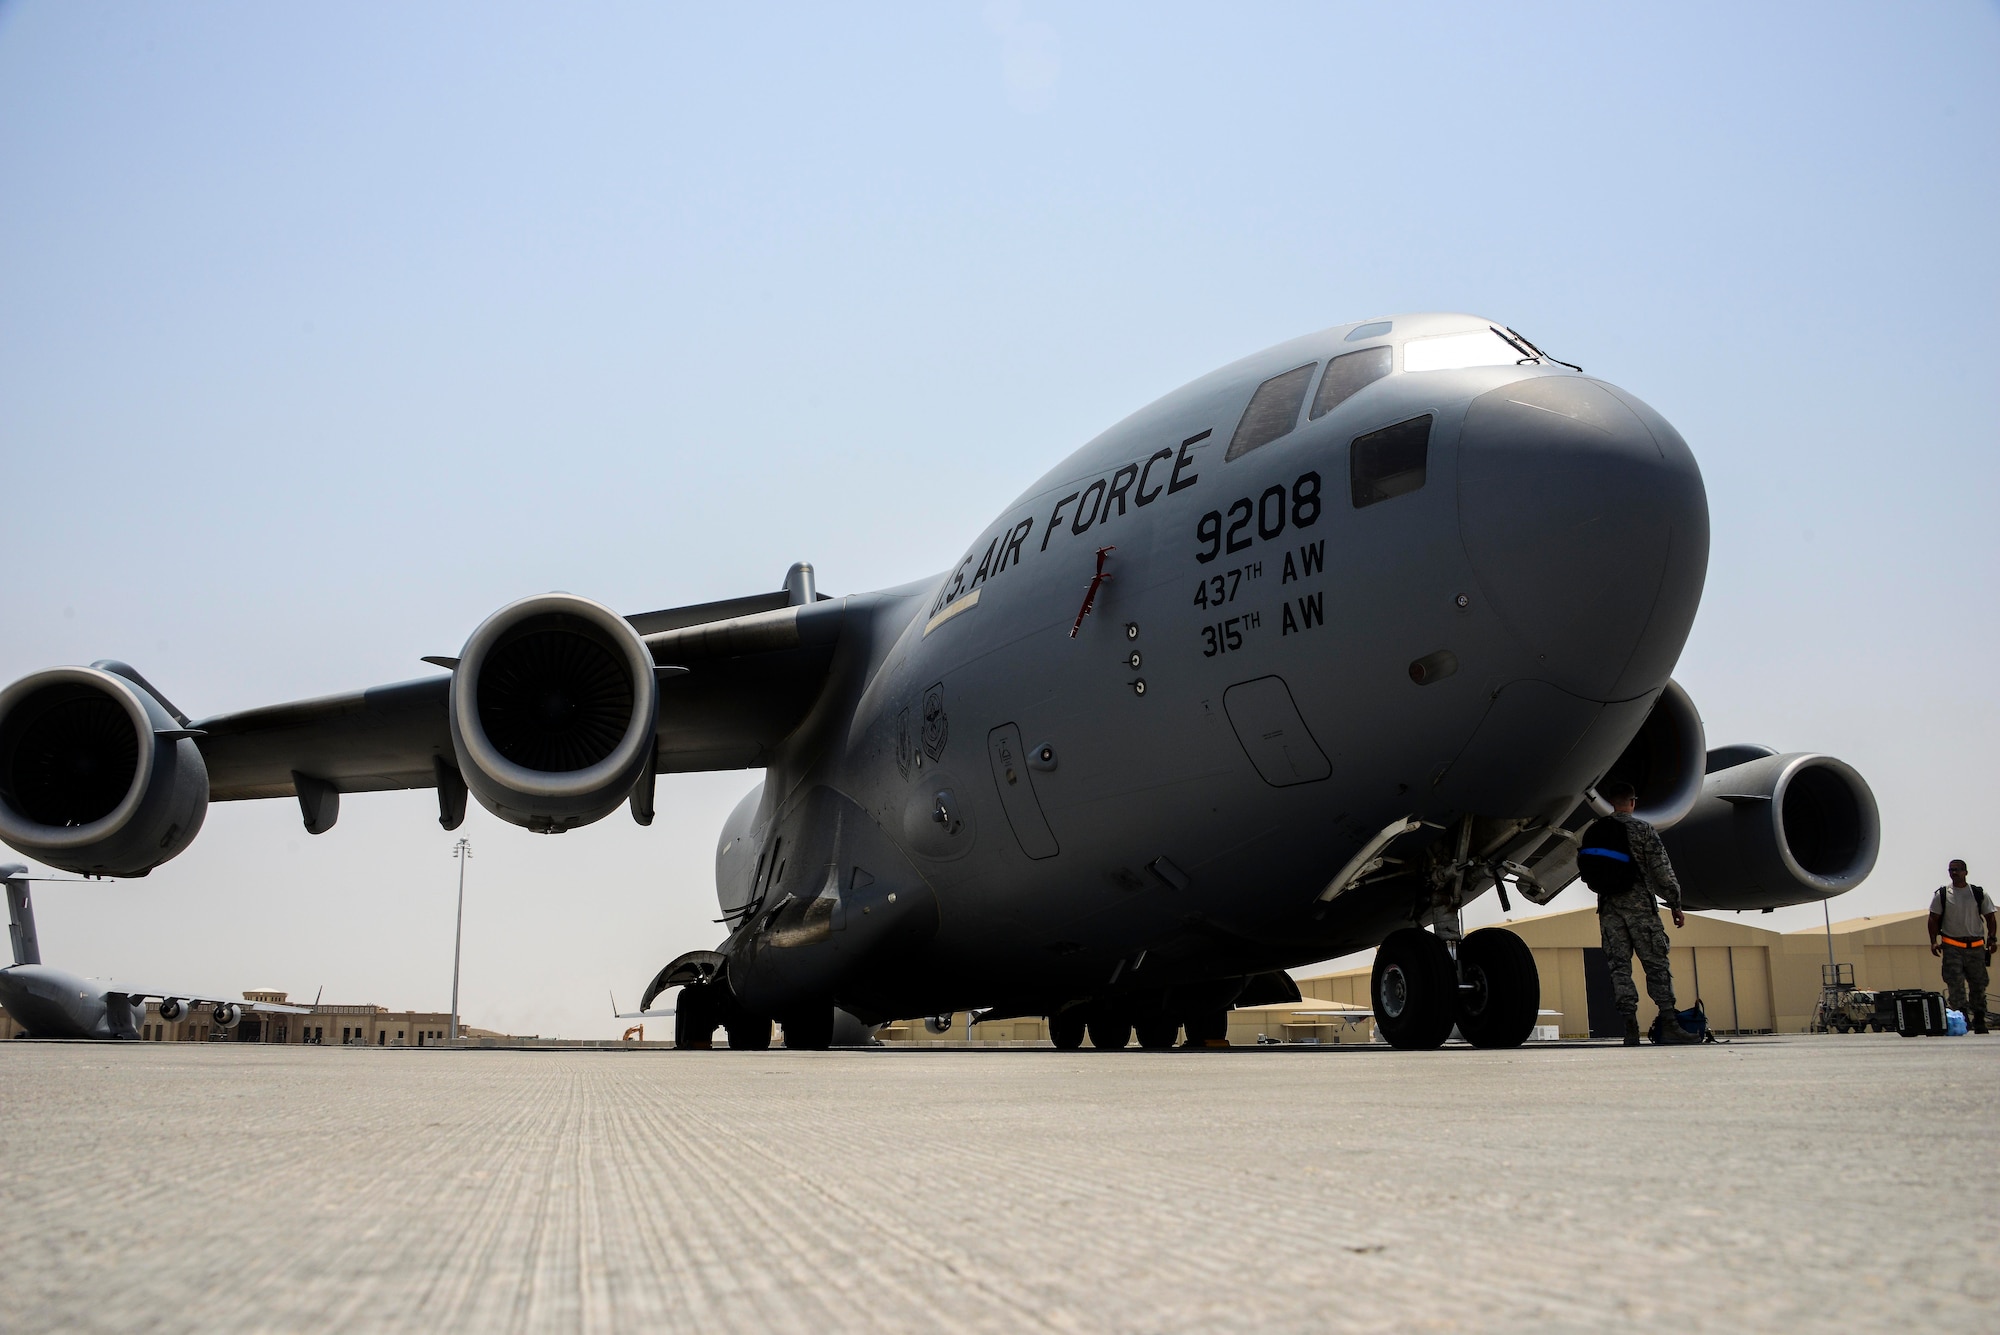 A C-17 Globemaster III sits on the flight line while Airmen from the 8th Expeditionary Air Mobility Squadron, Aircraft Maintenance Flight finish their preflight inspection June 30, 2016, at Al Udeid Air Base, Qatar. The 8 EAMS provides airlift capability to units across the U.S. Air Forces Central Command area of responsibility in support of Operation Inherent Resolve, Freedom Sentinel and Combined Joint Task Force - Horn of Africa. (U.S. Air Force photo/Senior Airman Janelle Patiño/Released)